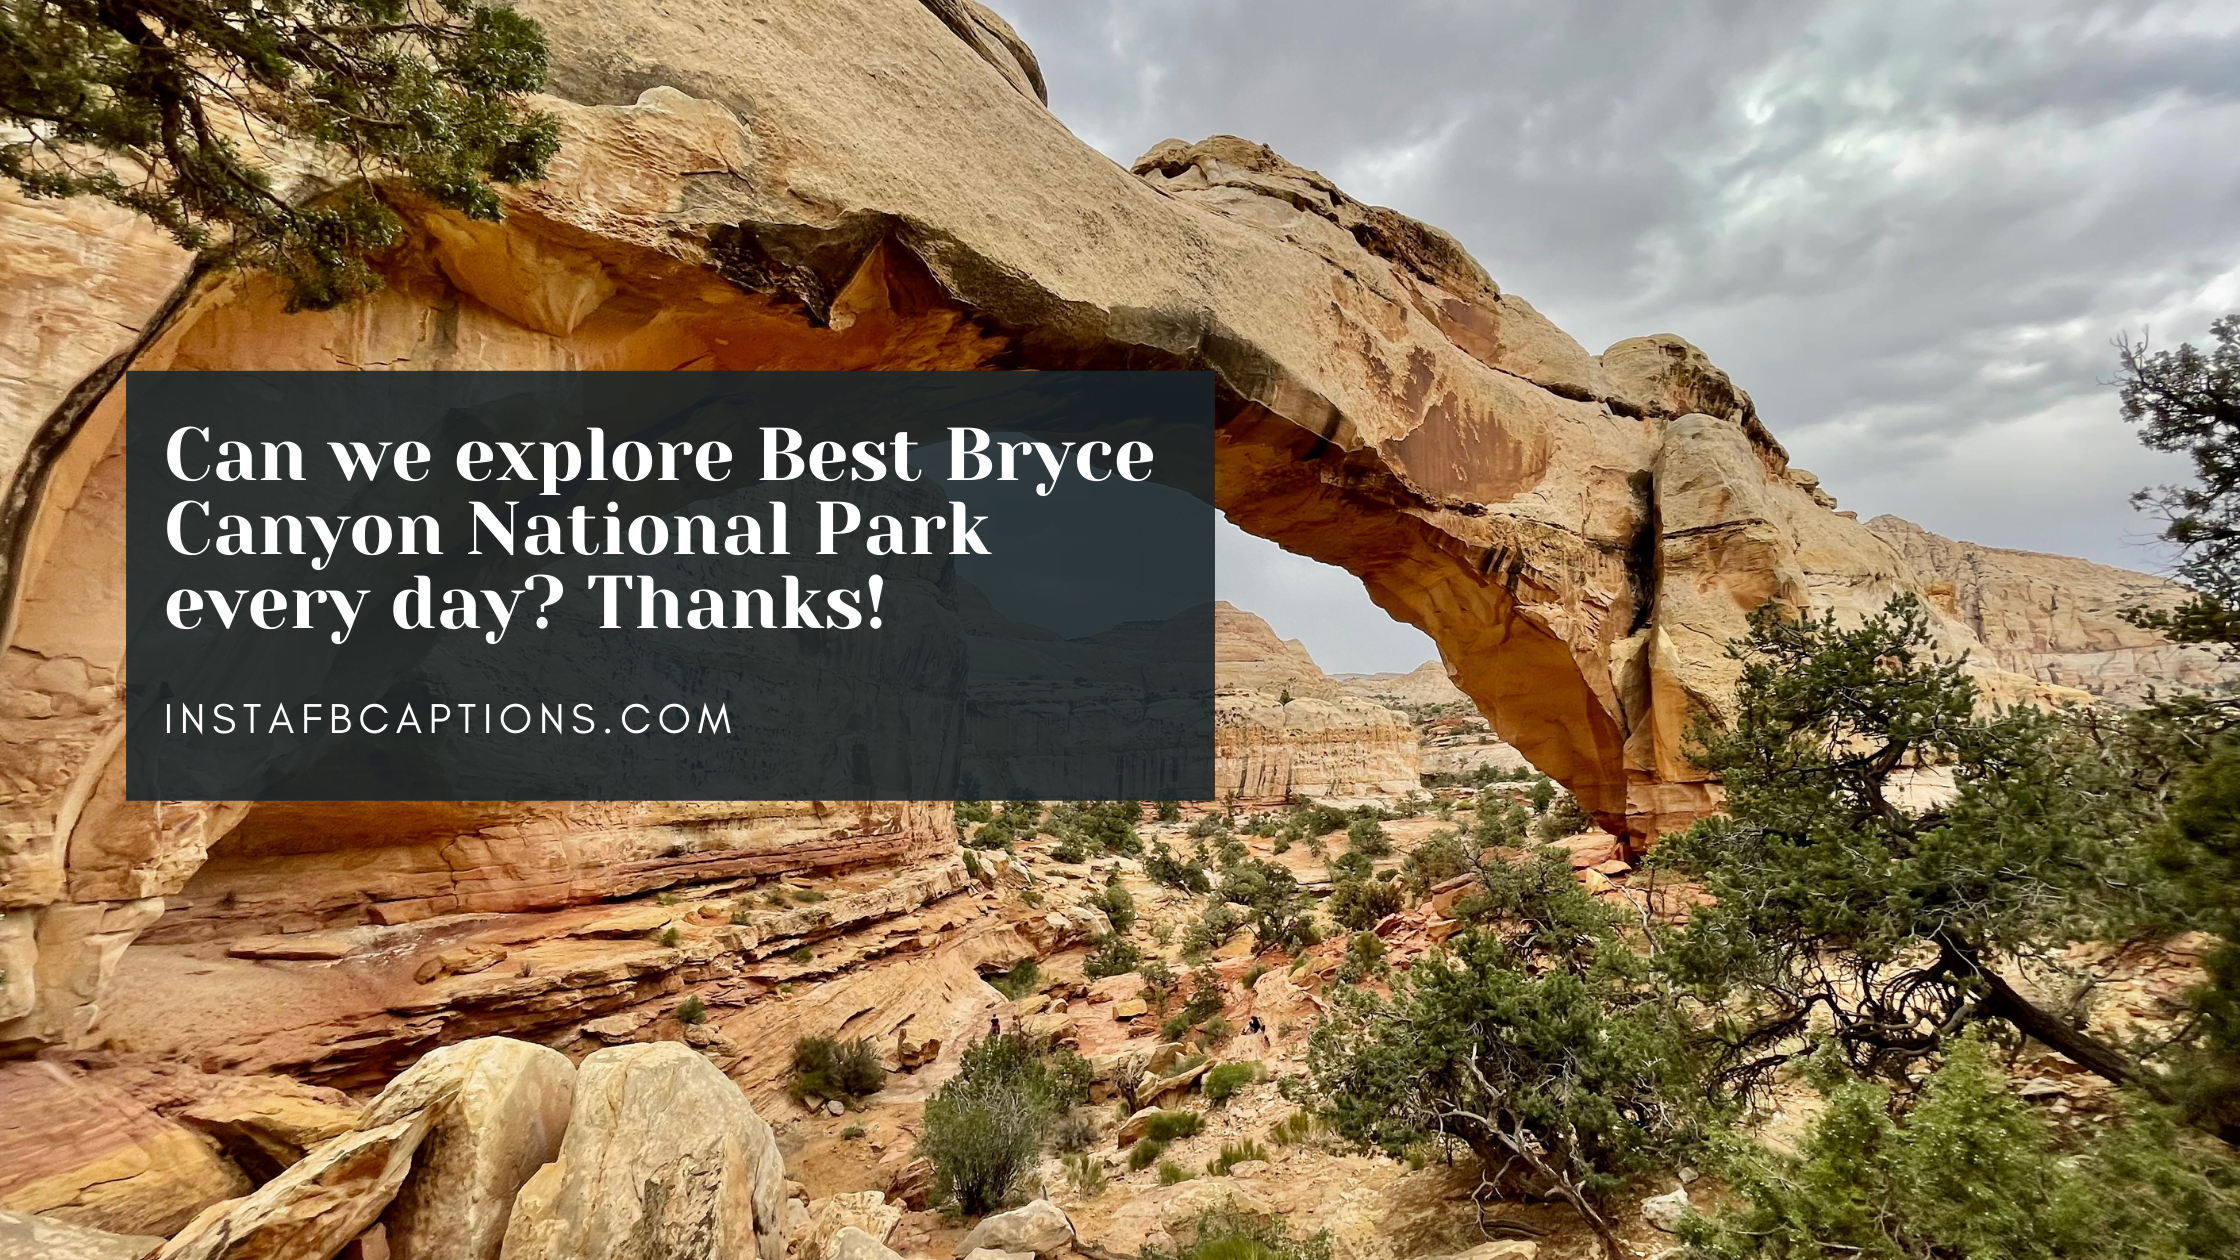 Some Of The Best Bryce Canyon National Park Captions  - Some of the Best Bryce Canyon National Park Captions  - 88 Bryce Canyon National Park Instagram Captions in 2023